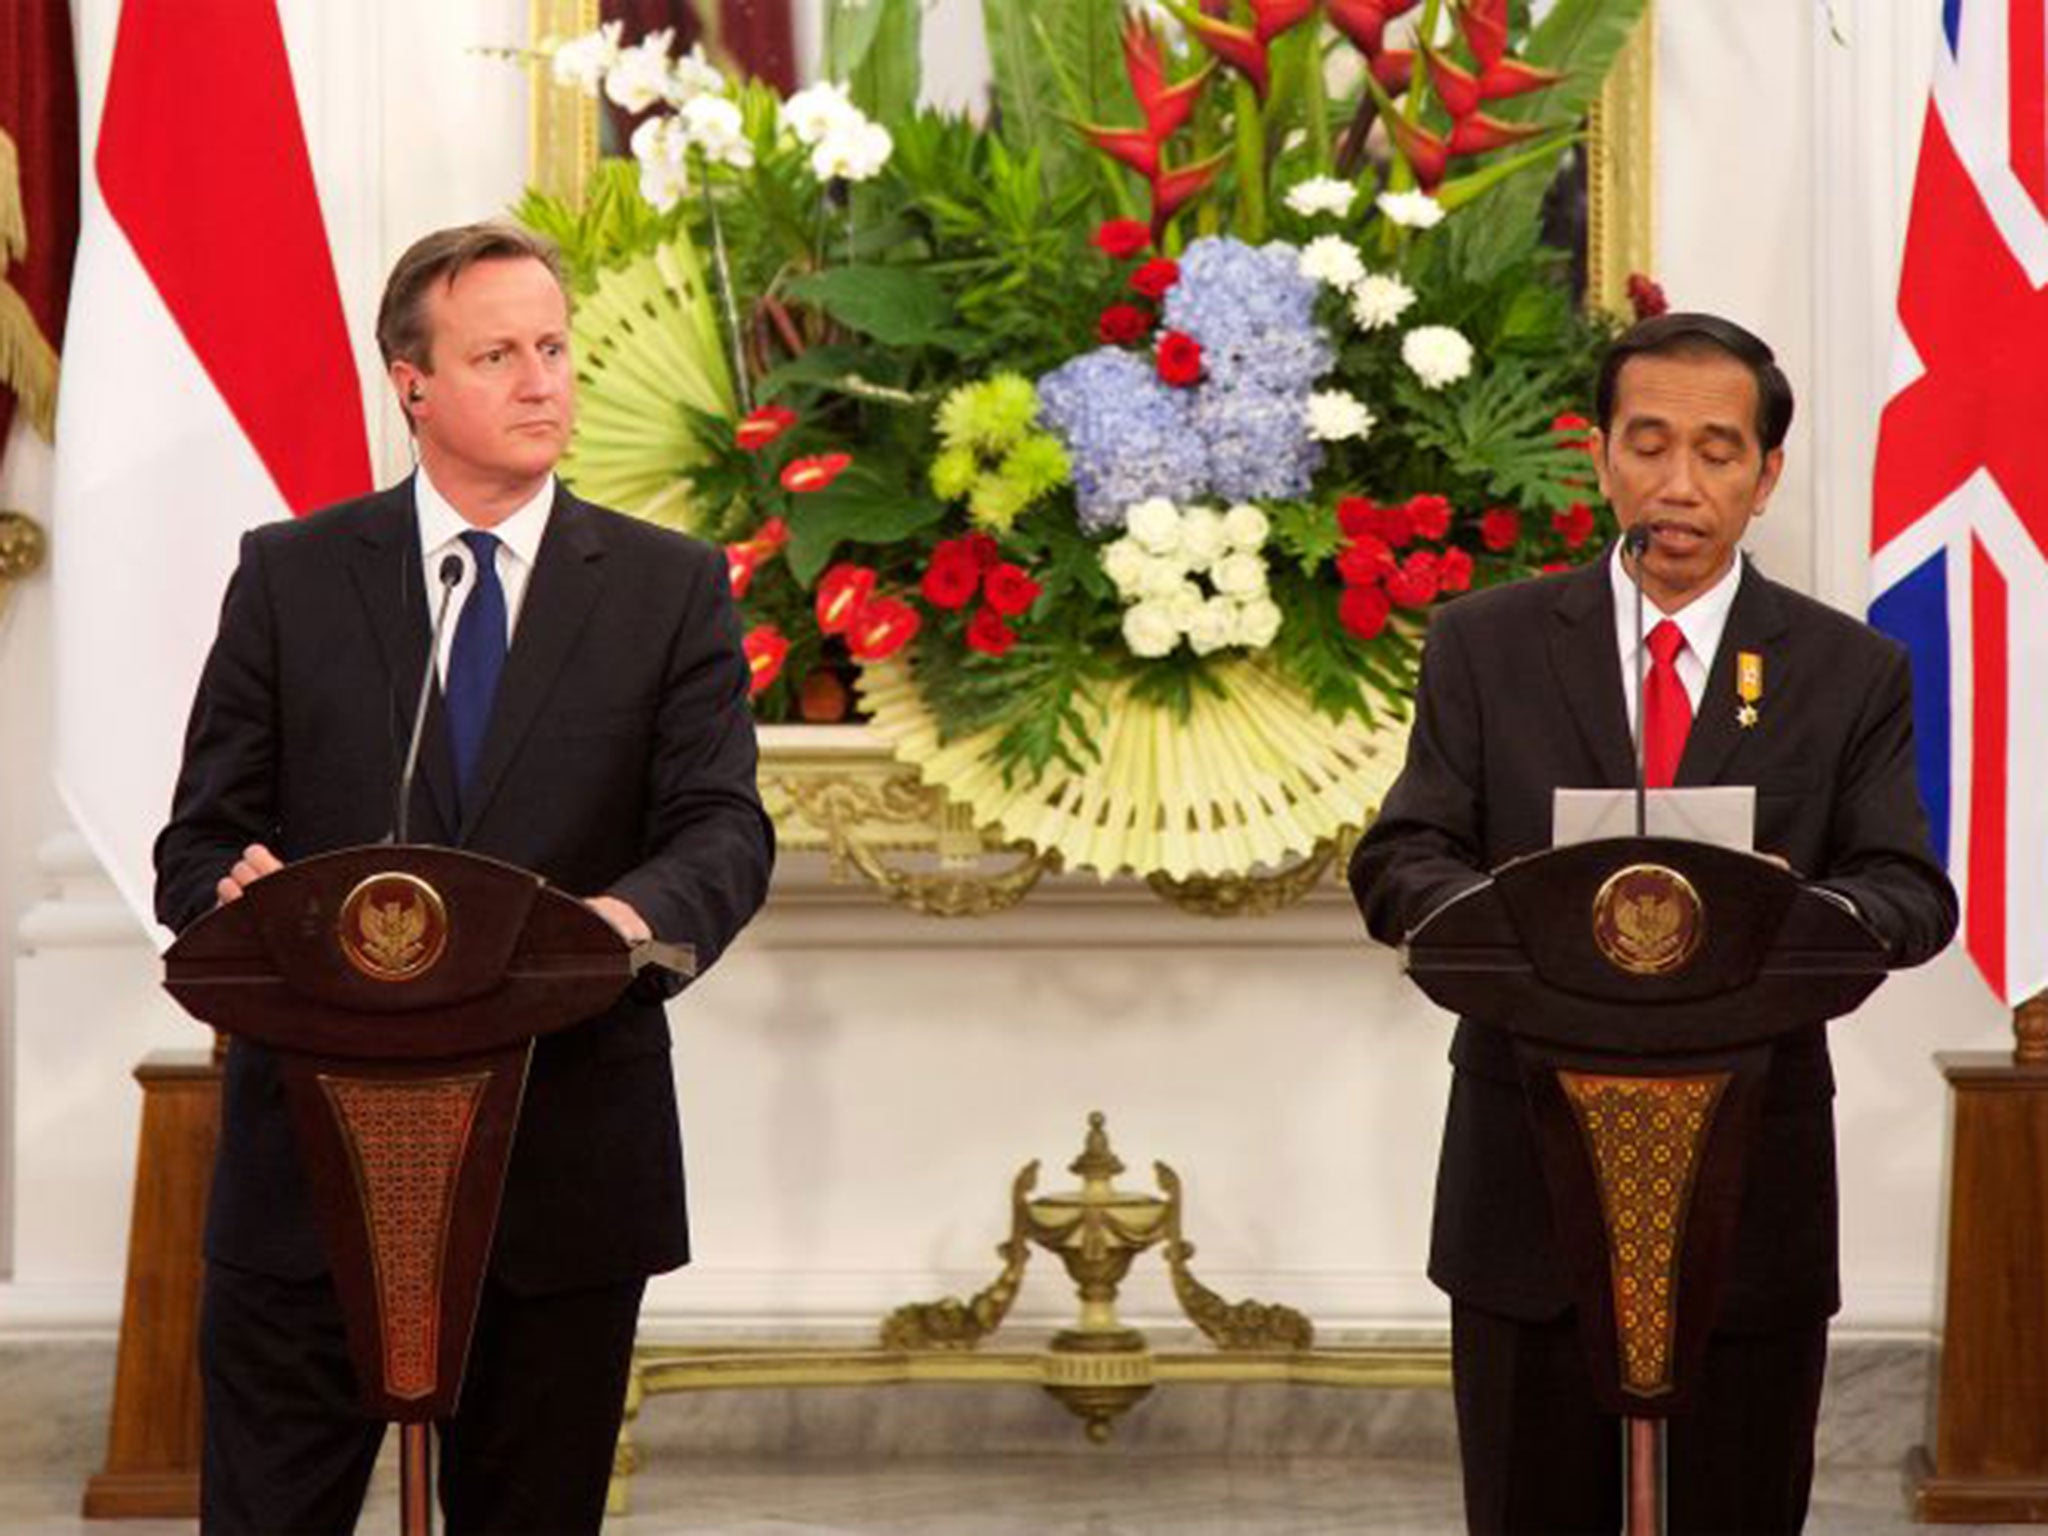 Cameron (L) and President Joko Widodo, speak at a joint briefing after the signing of several memorandums